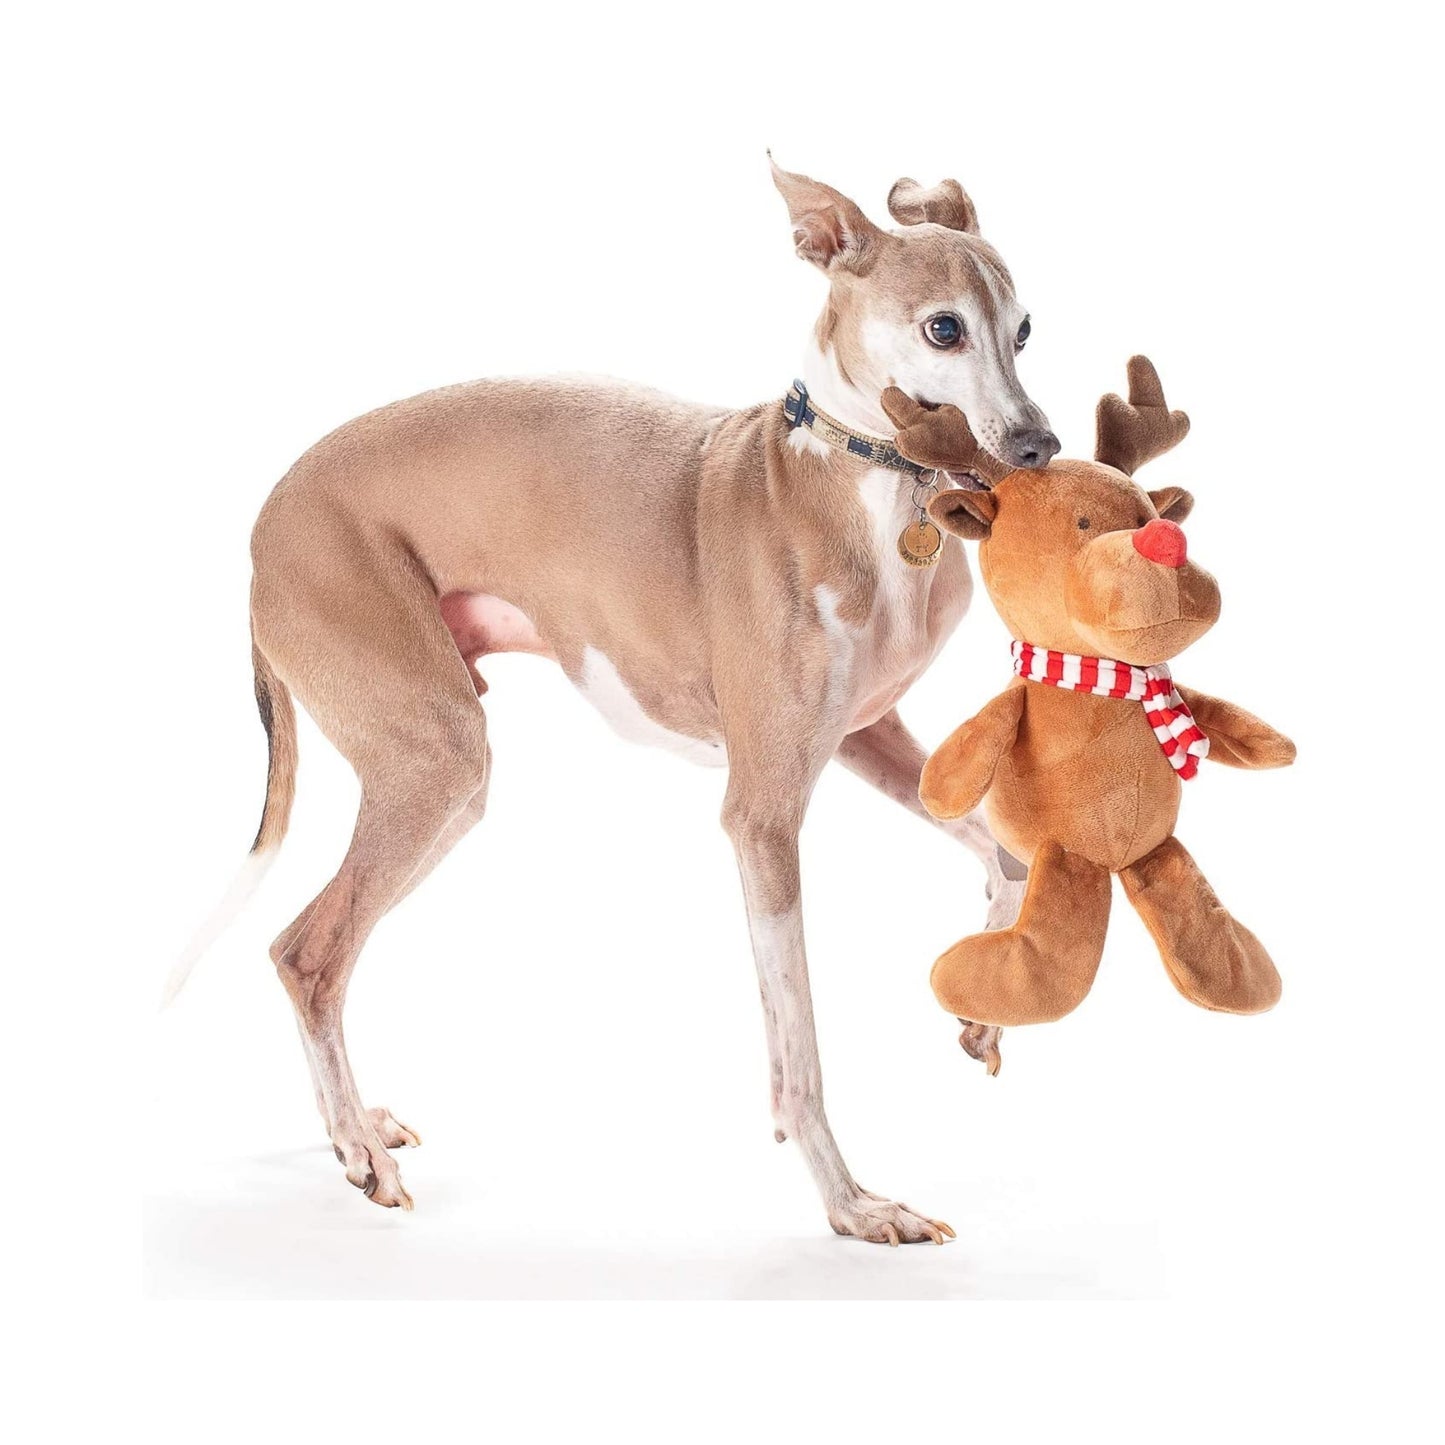 Midlee Christmas Reindeer Plush Dog Toy with Scarf